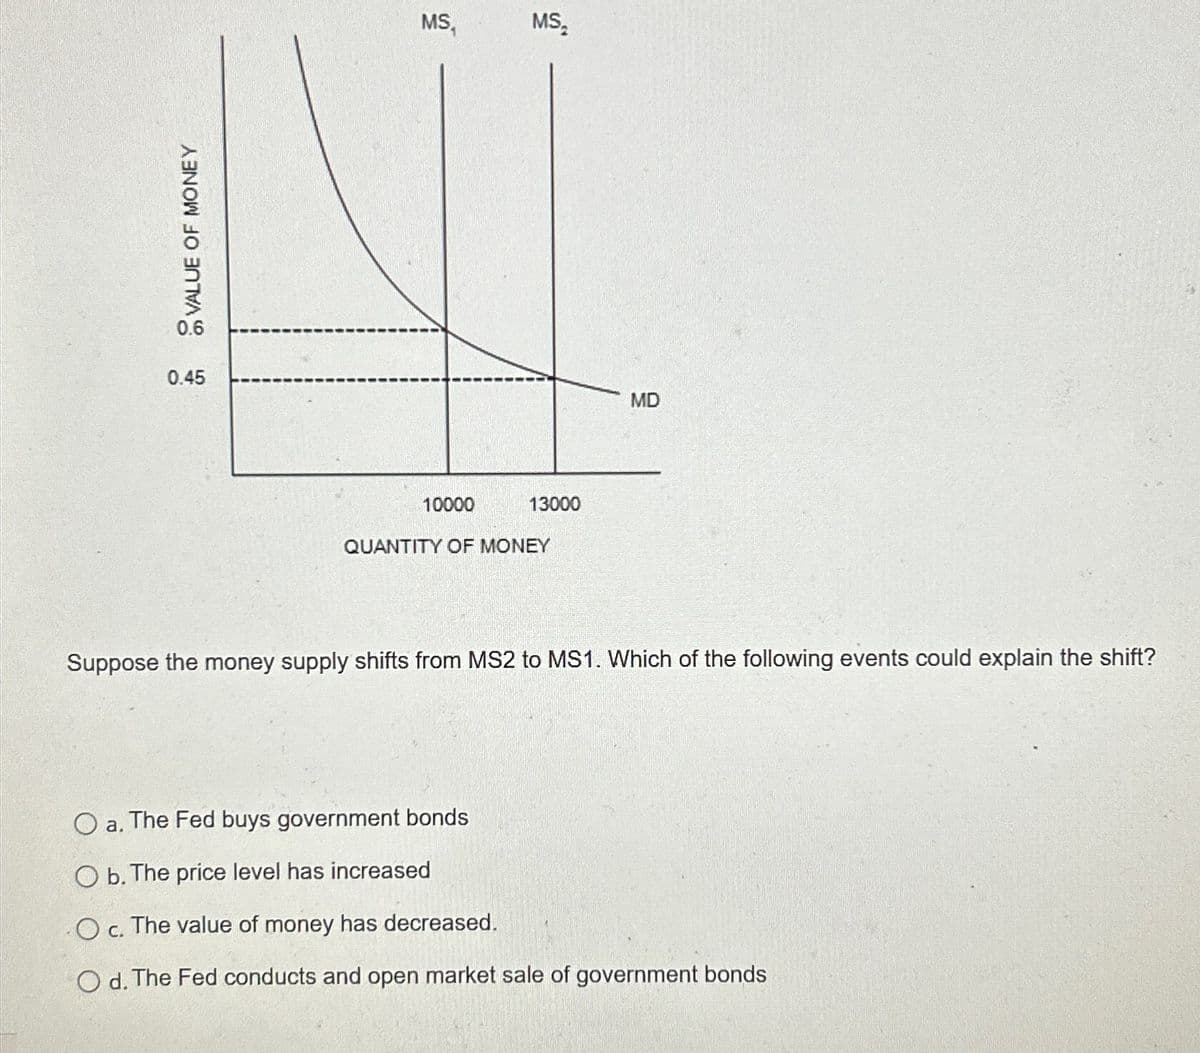 VALUE OF MONEY
0.45
10000
MSA
MS
13000
QUANTITY OF MONEY
MD
Suppose the money supply shifts from MS2 to MS1. Which of the following events could explain the shift?
○ a. The Fed buys government bonds
Ob. The price level has increased
Oc. The value of money has decreased.
C.
Od. The Fed conducts and open market sale of government bonds